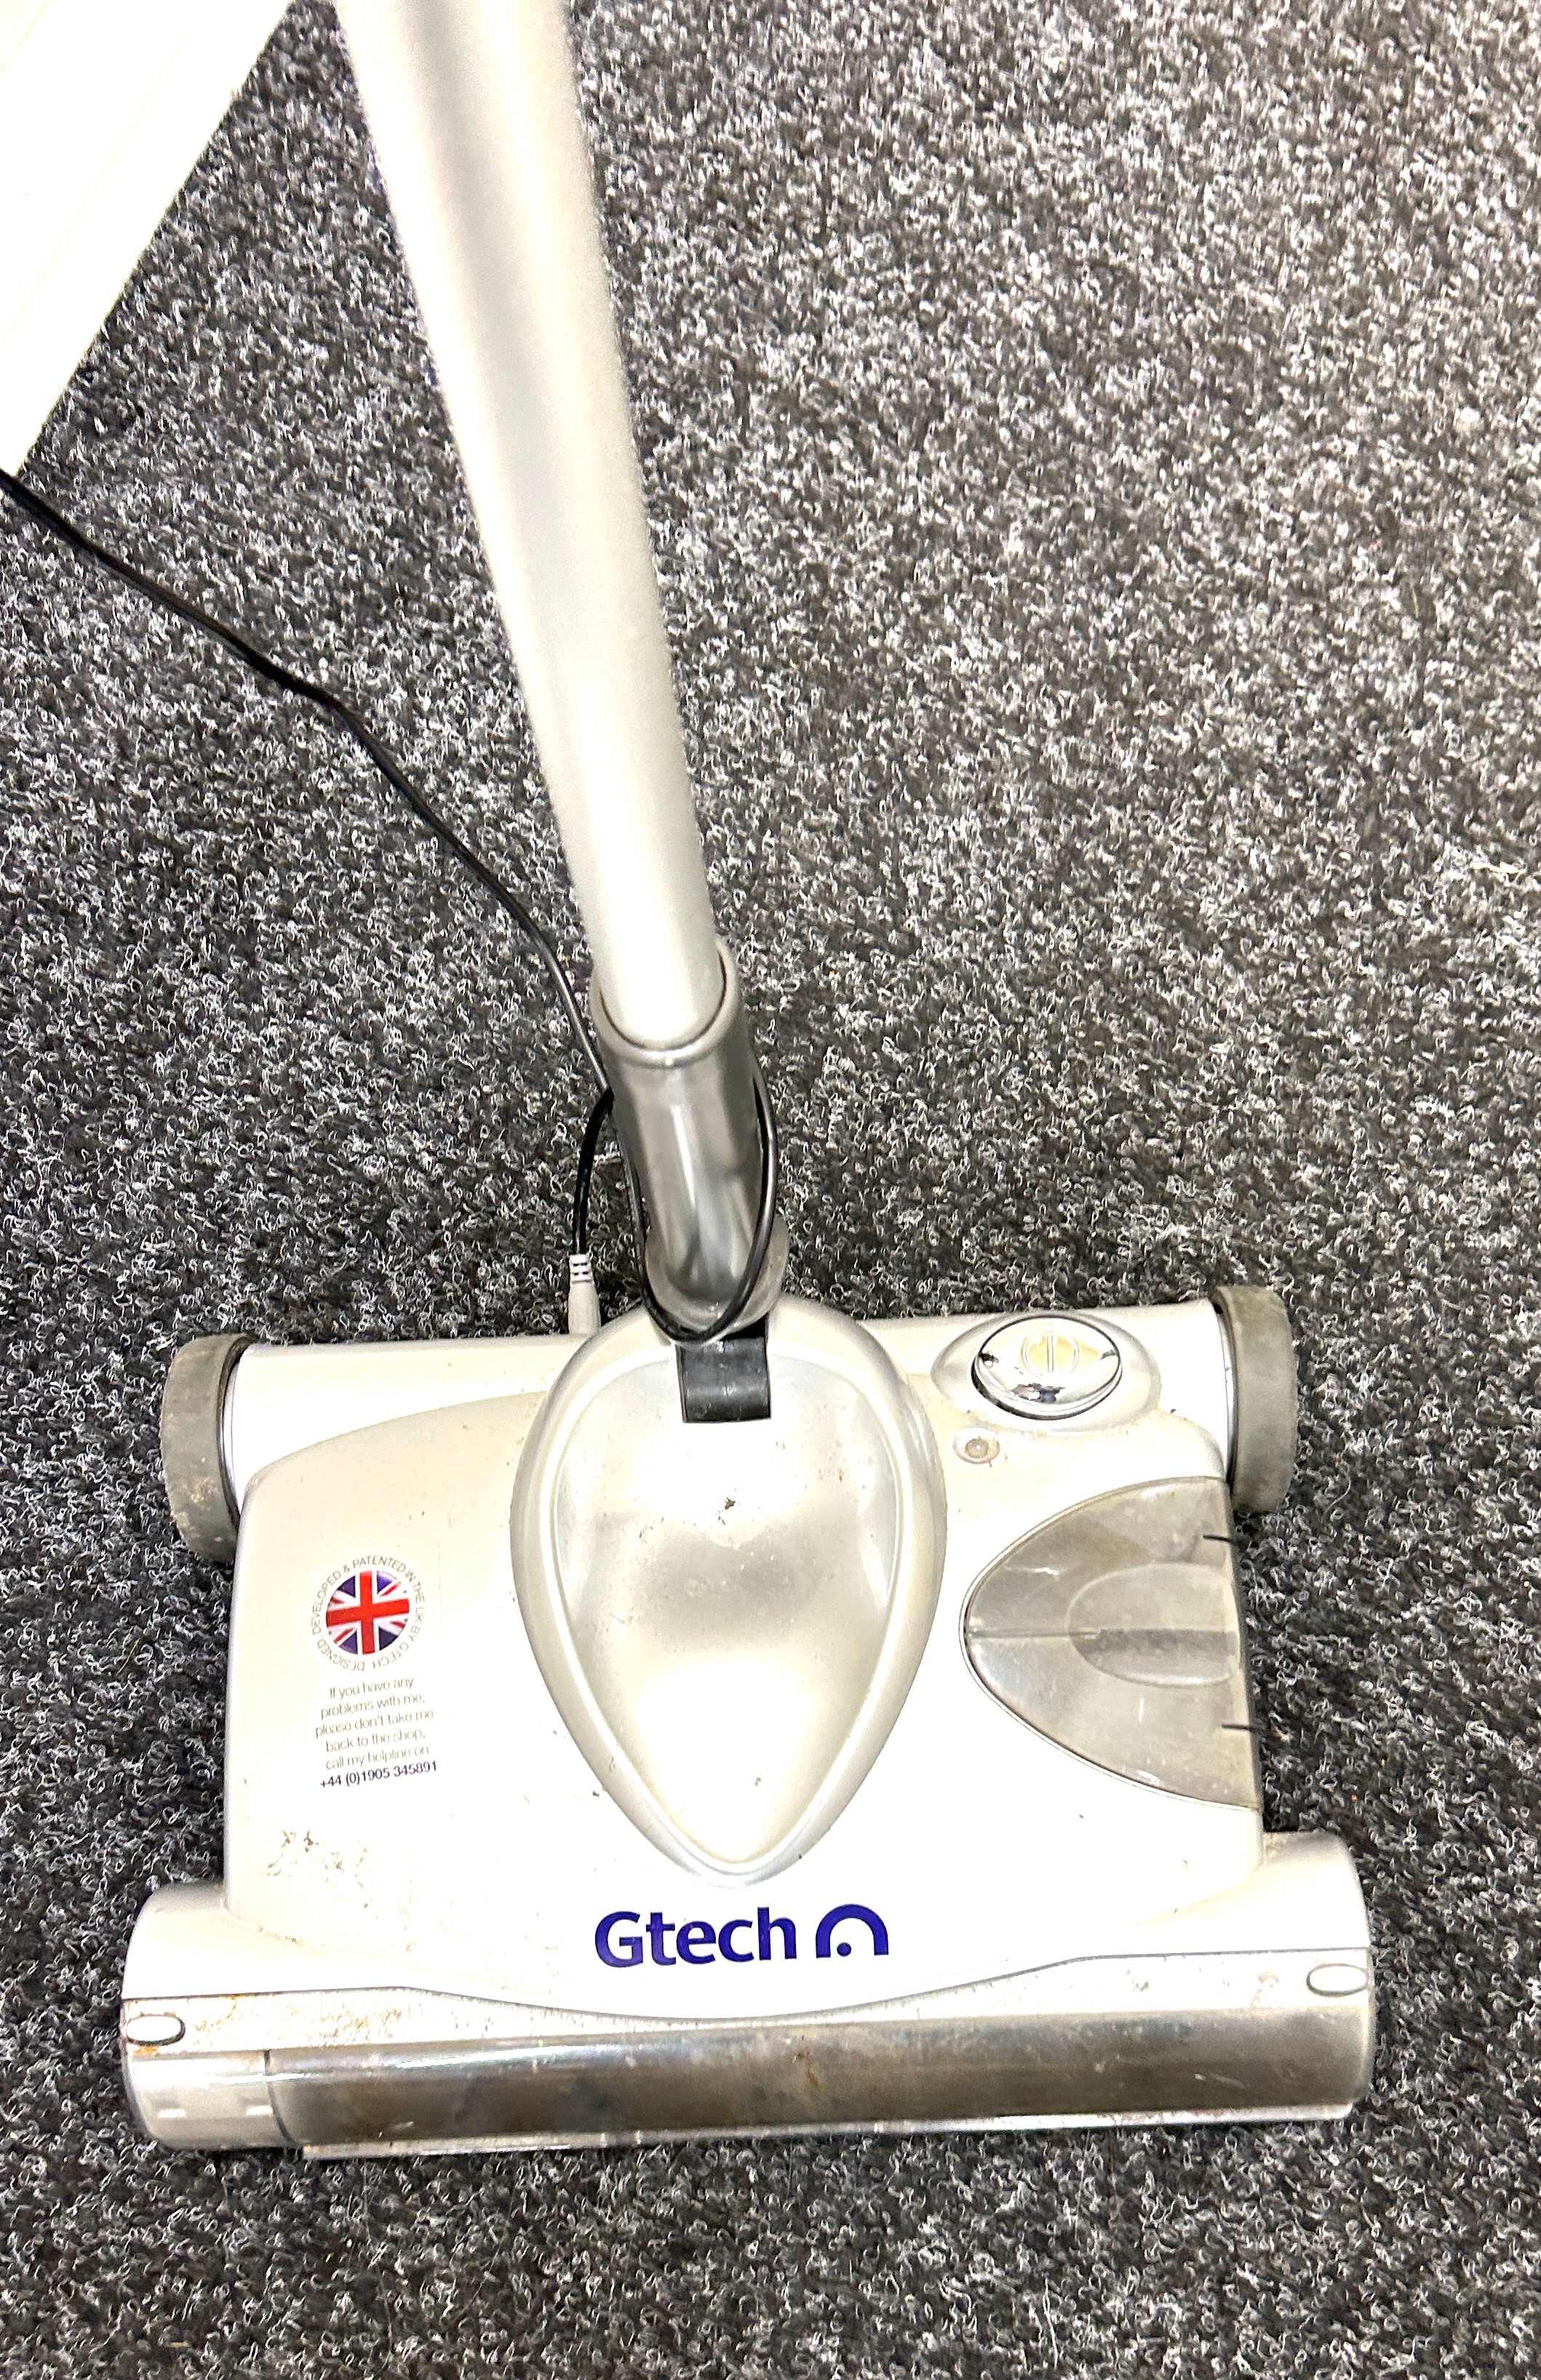 G-tech cordless hoover, working order - Image 2 of 2